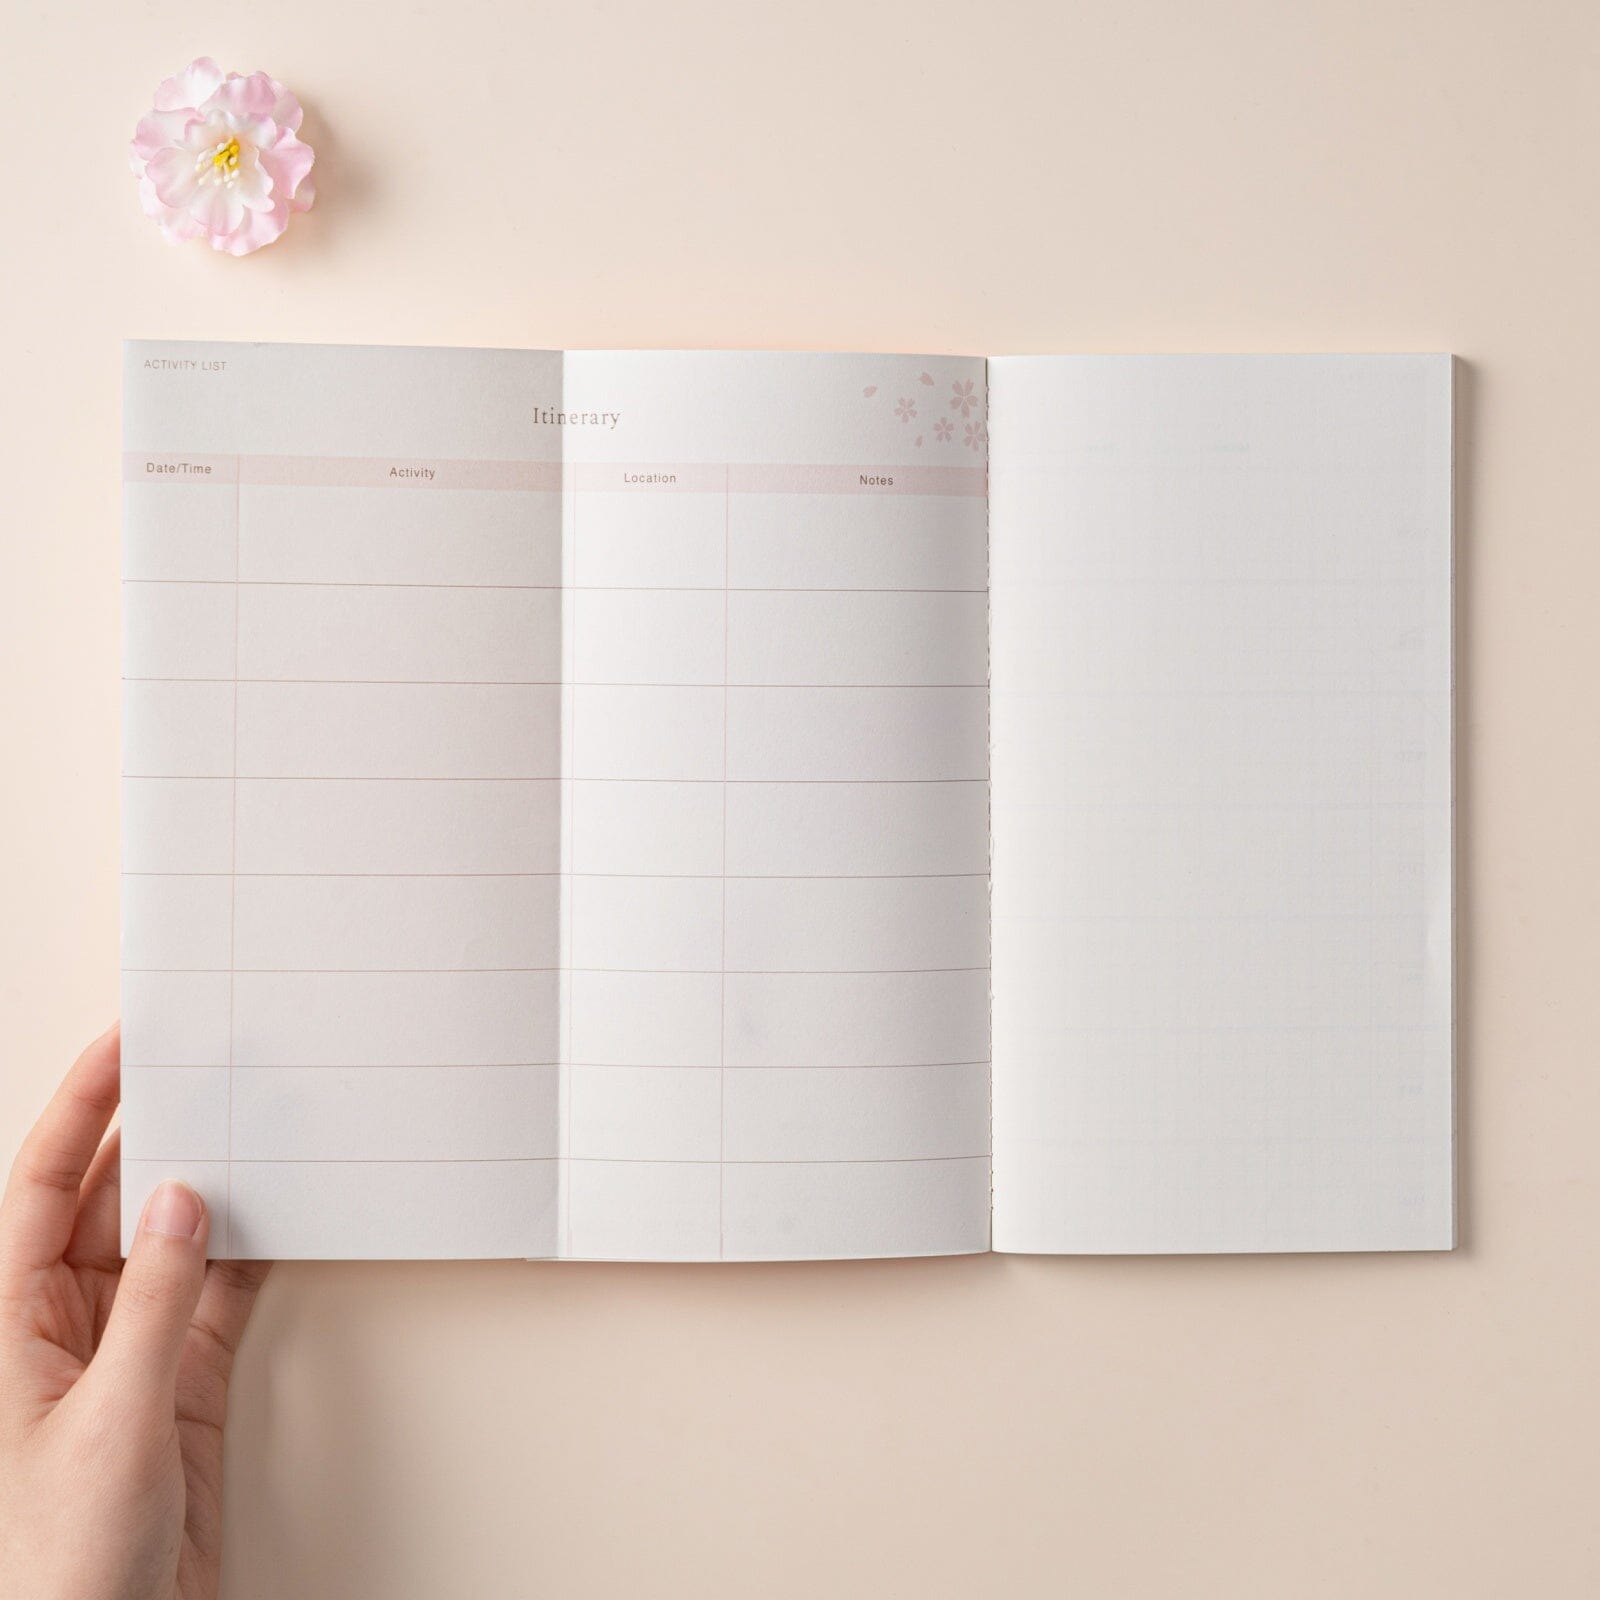 Itinerary page of Hinoki into the blossom travel notebook refill